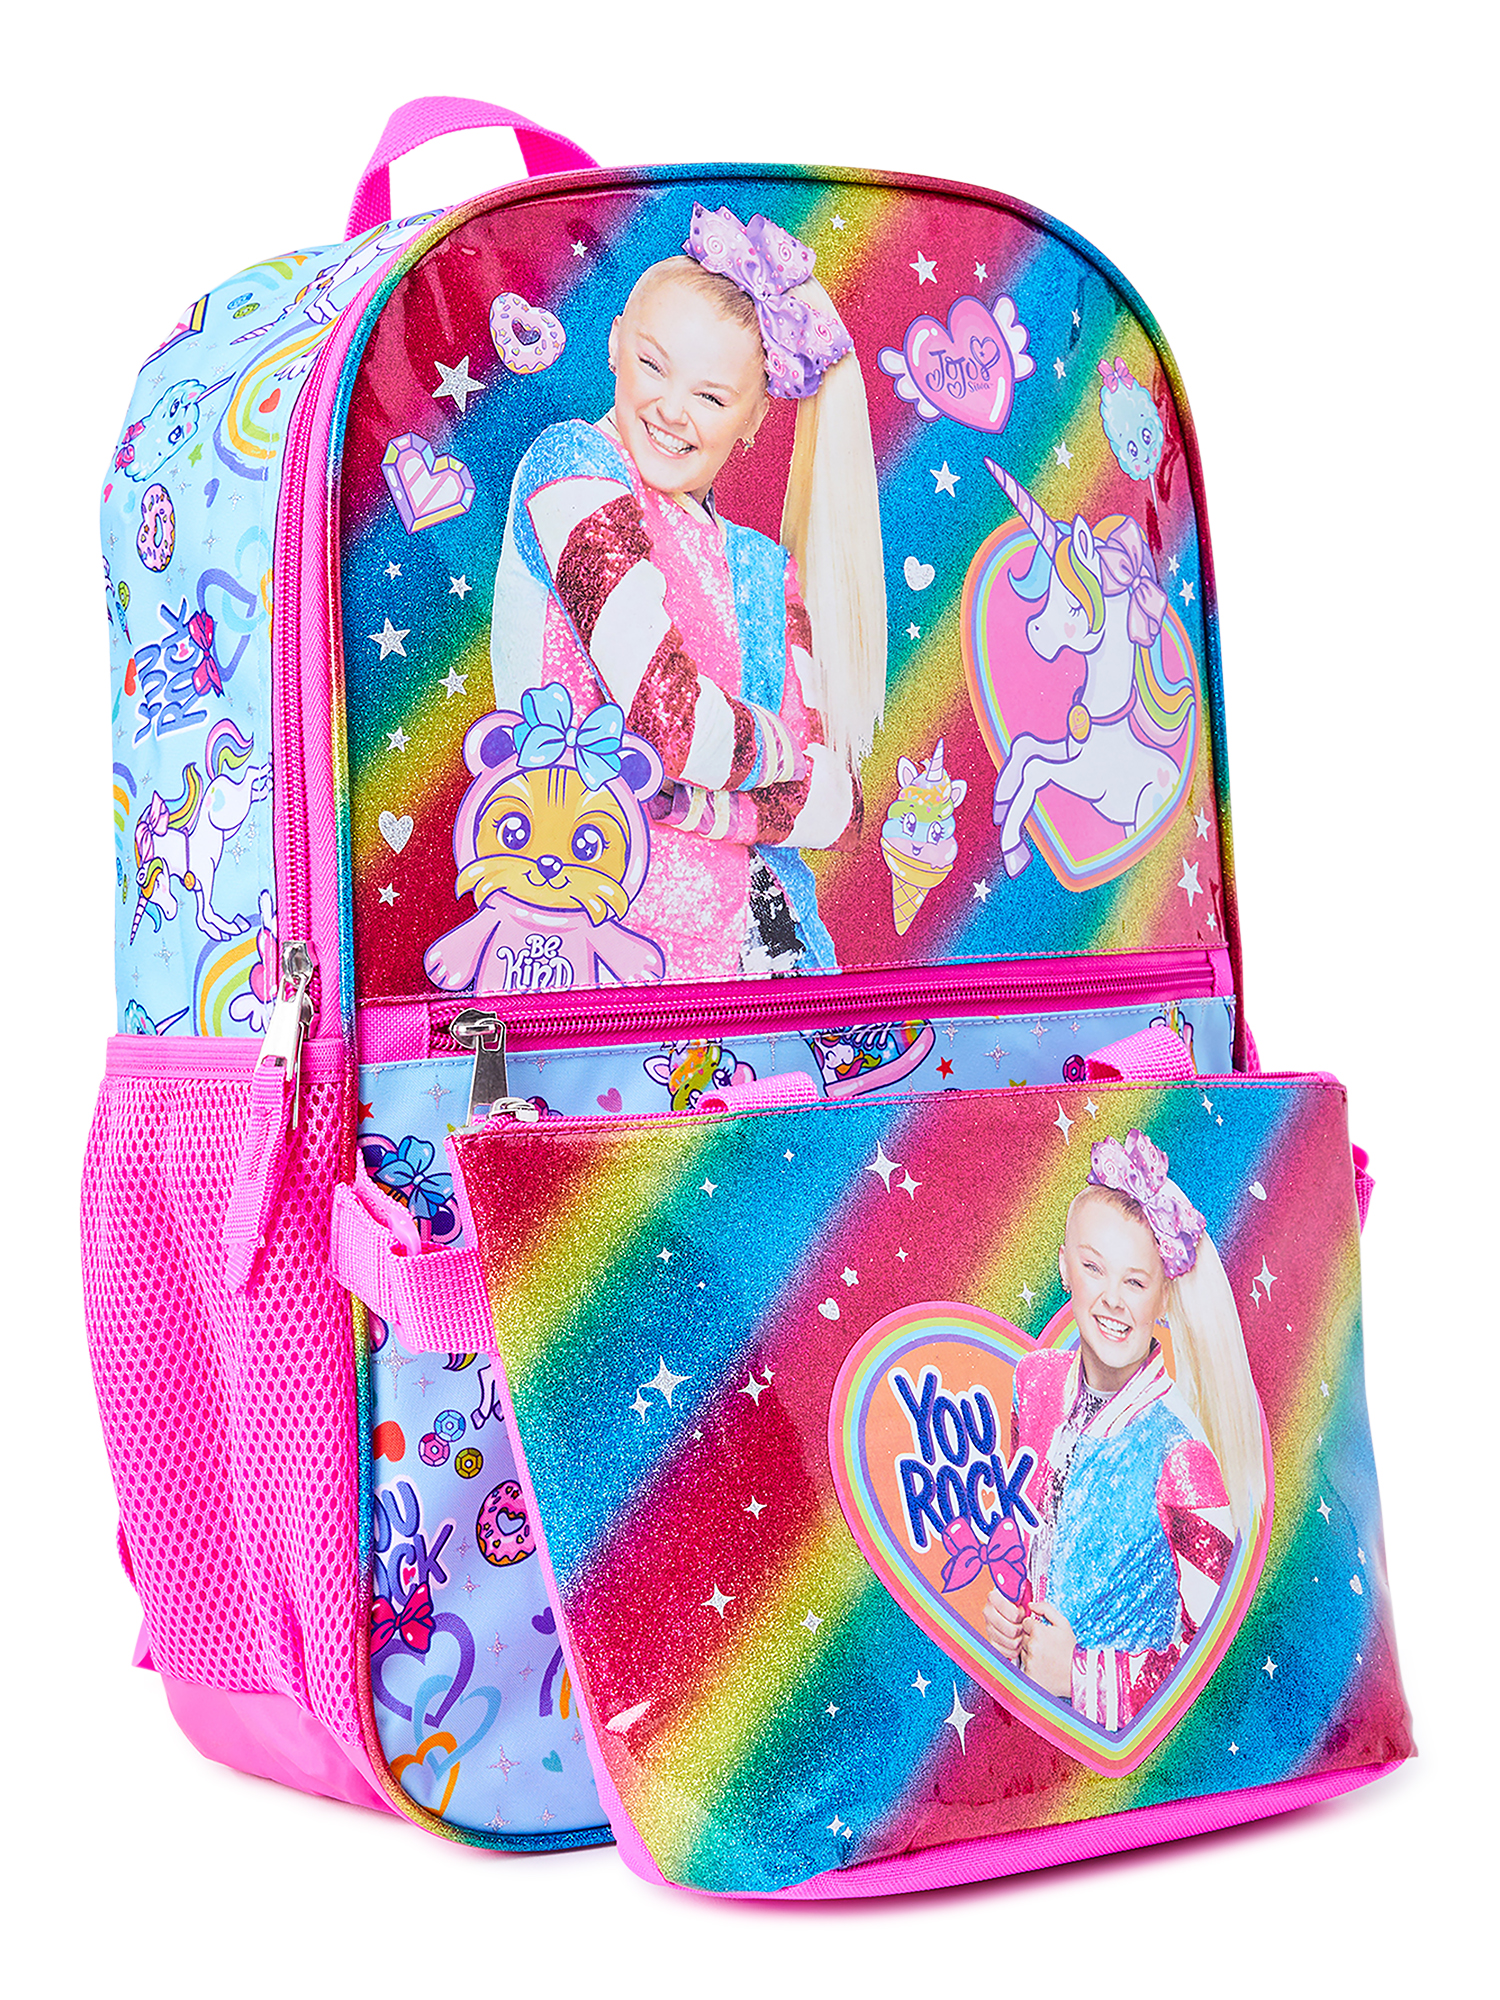 Jojo Siwa Rockin Rainbow Girls 17" Laptop Backpack 2-Piece Set with Lunch Tote Bag, Pink Multi-Color - image 1 of 4